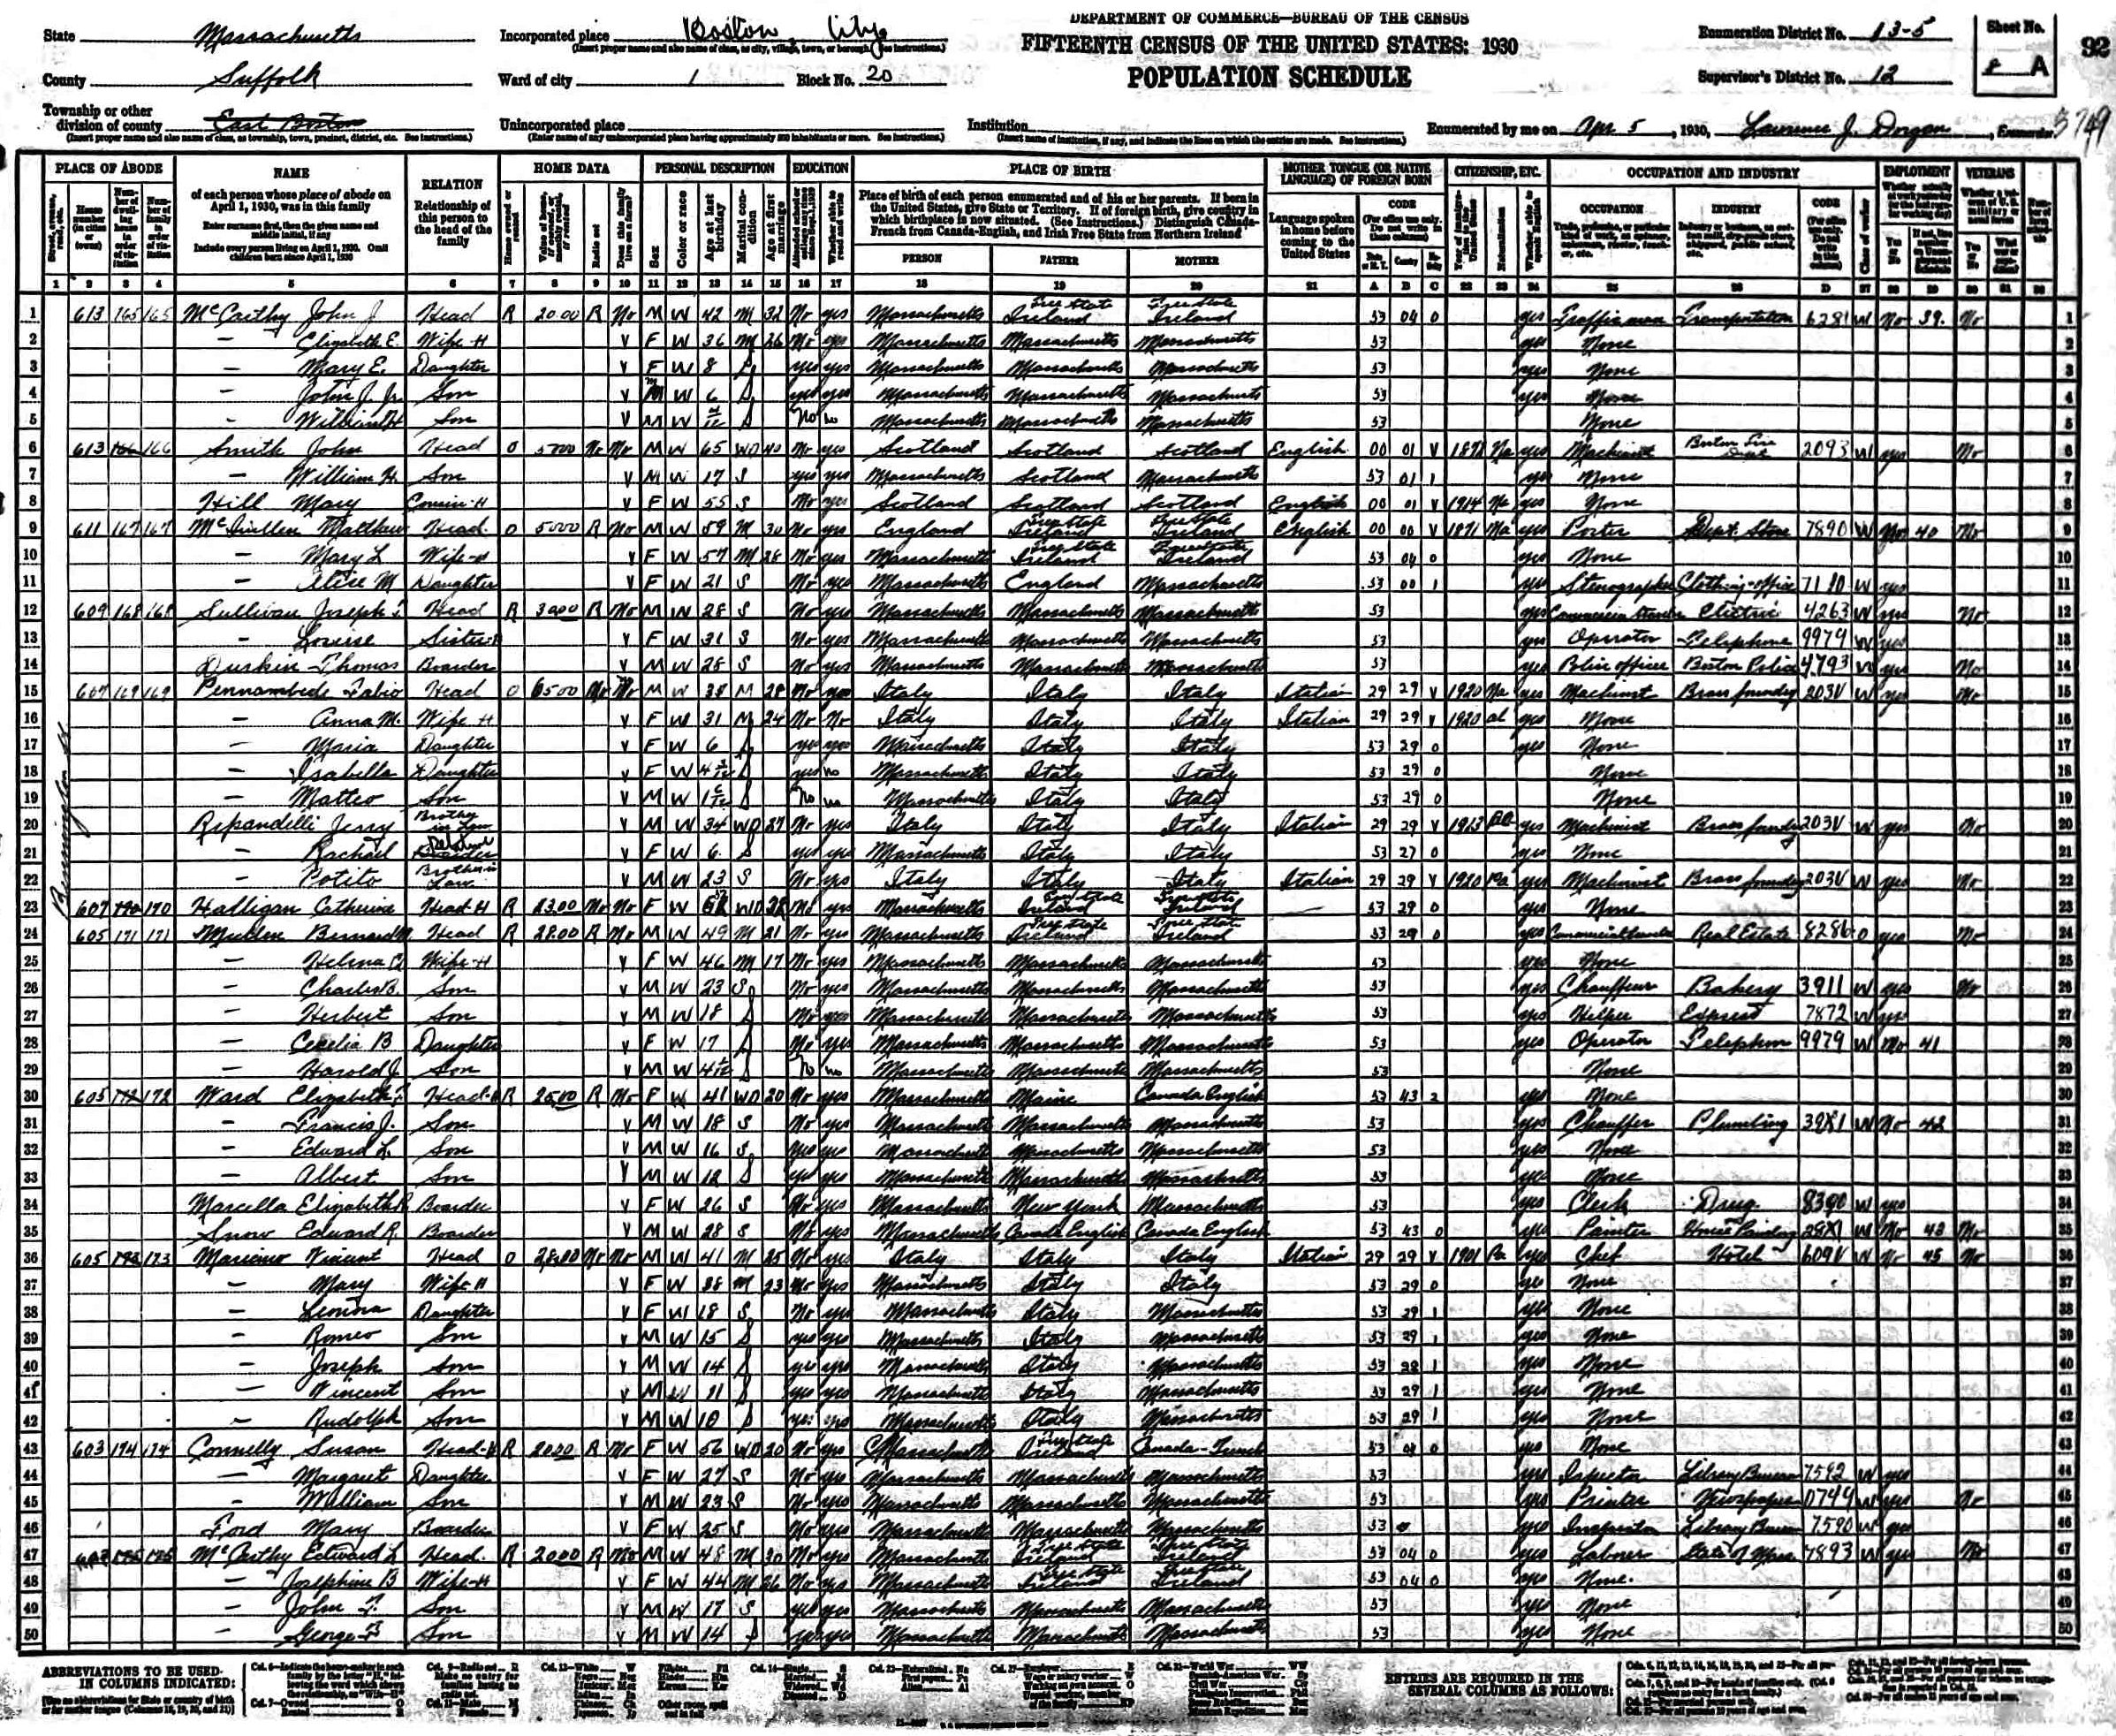 Image of a 1930 census page